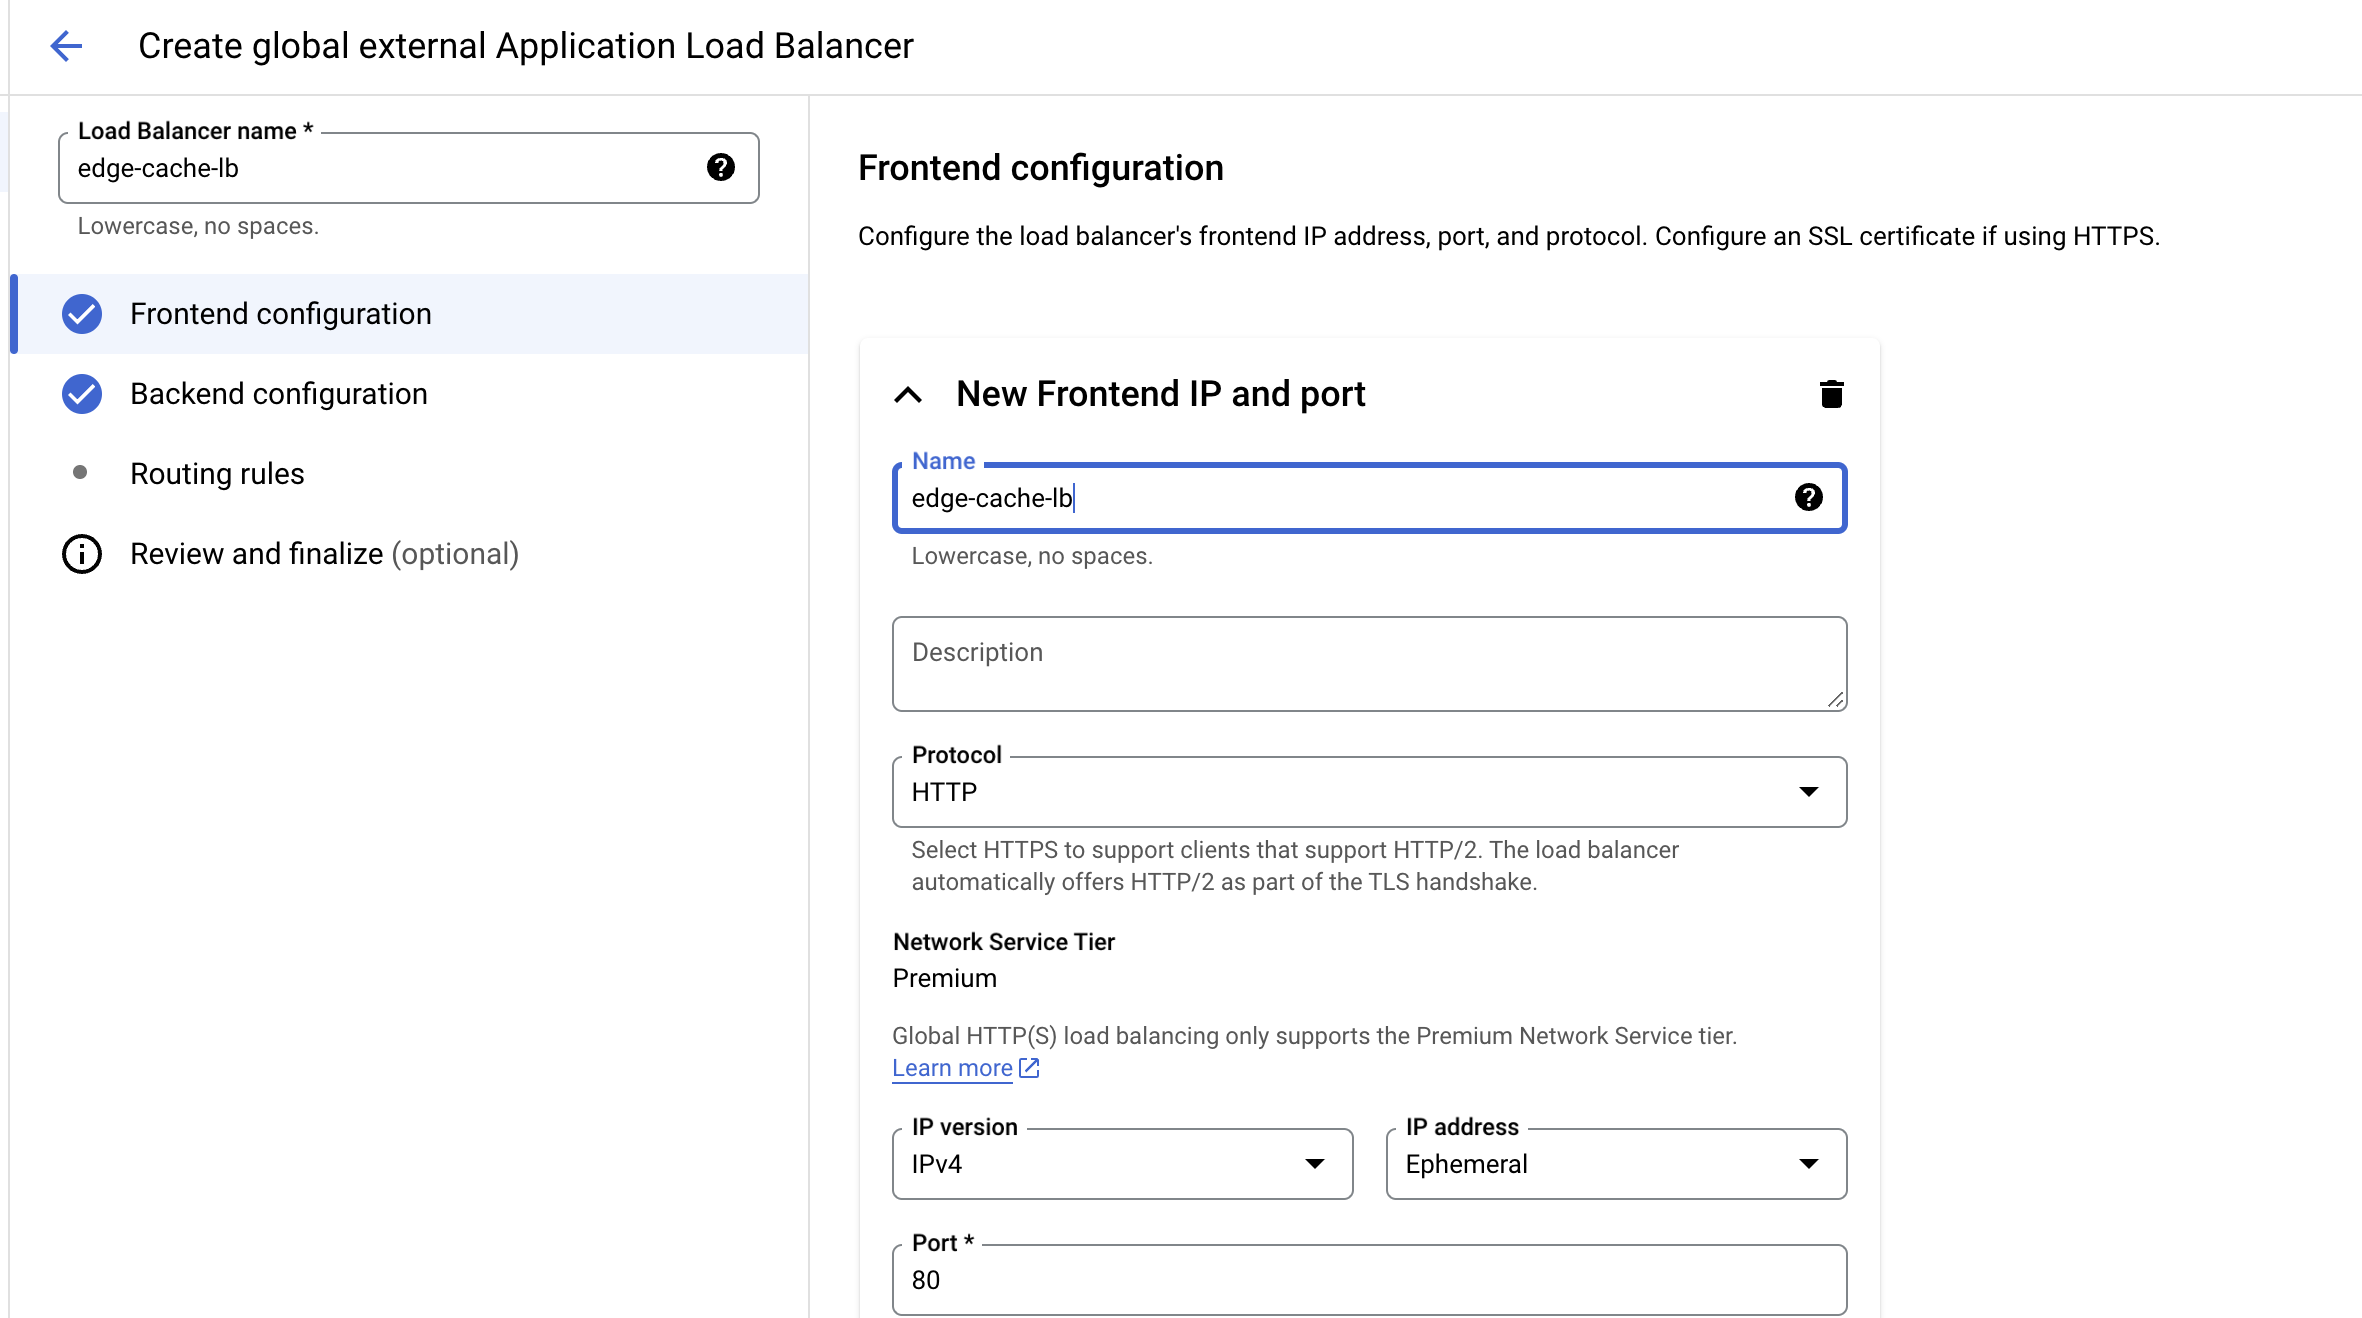 Frontend configuration page, which includes the load balancer's description